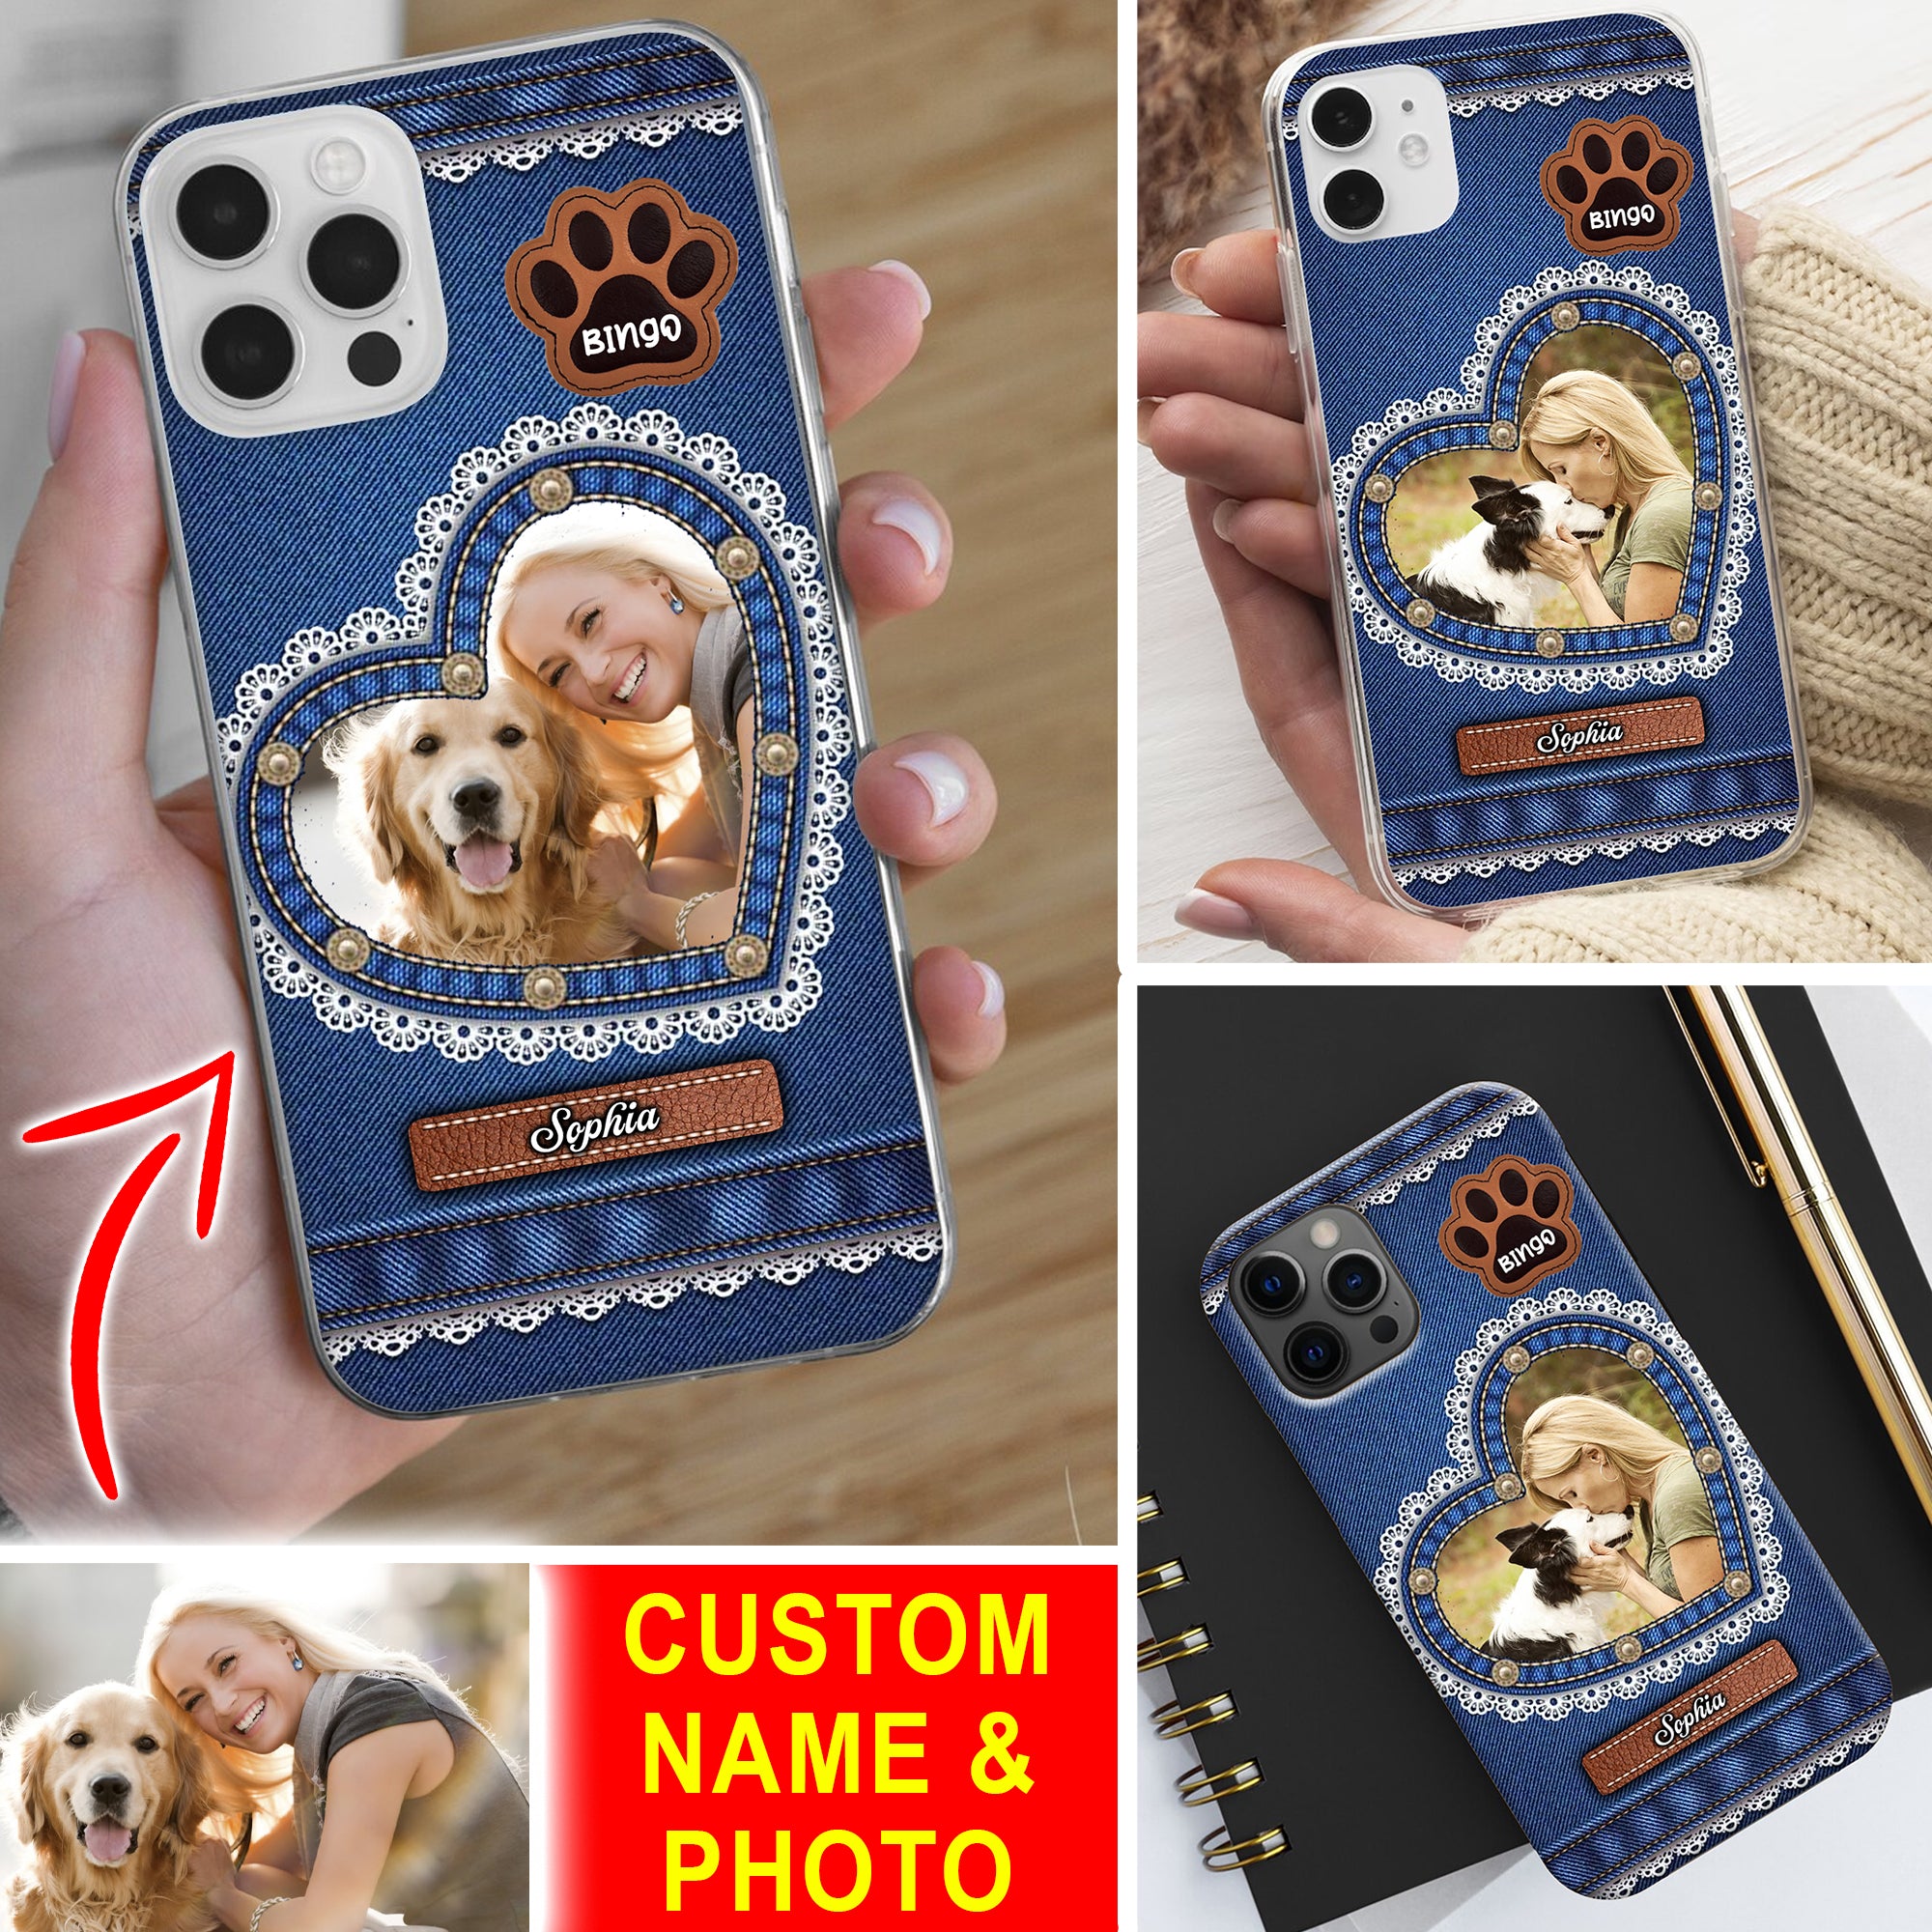 Denim Background Pet Photo - Custom Photo And Name - Personalized Phone Case, Gift For Pet Lover, Gift For Family